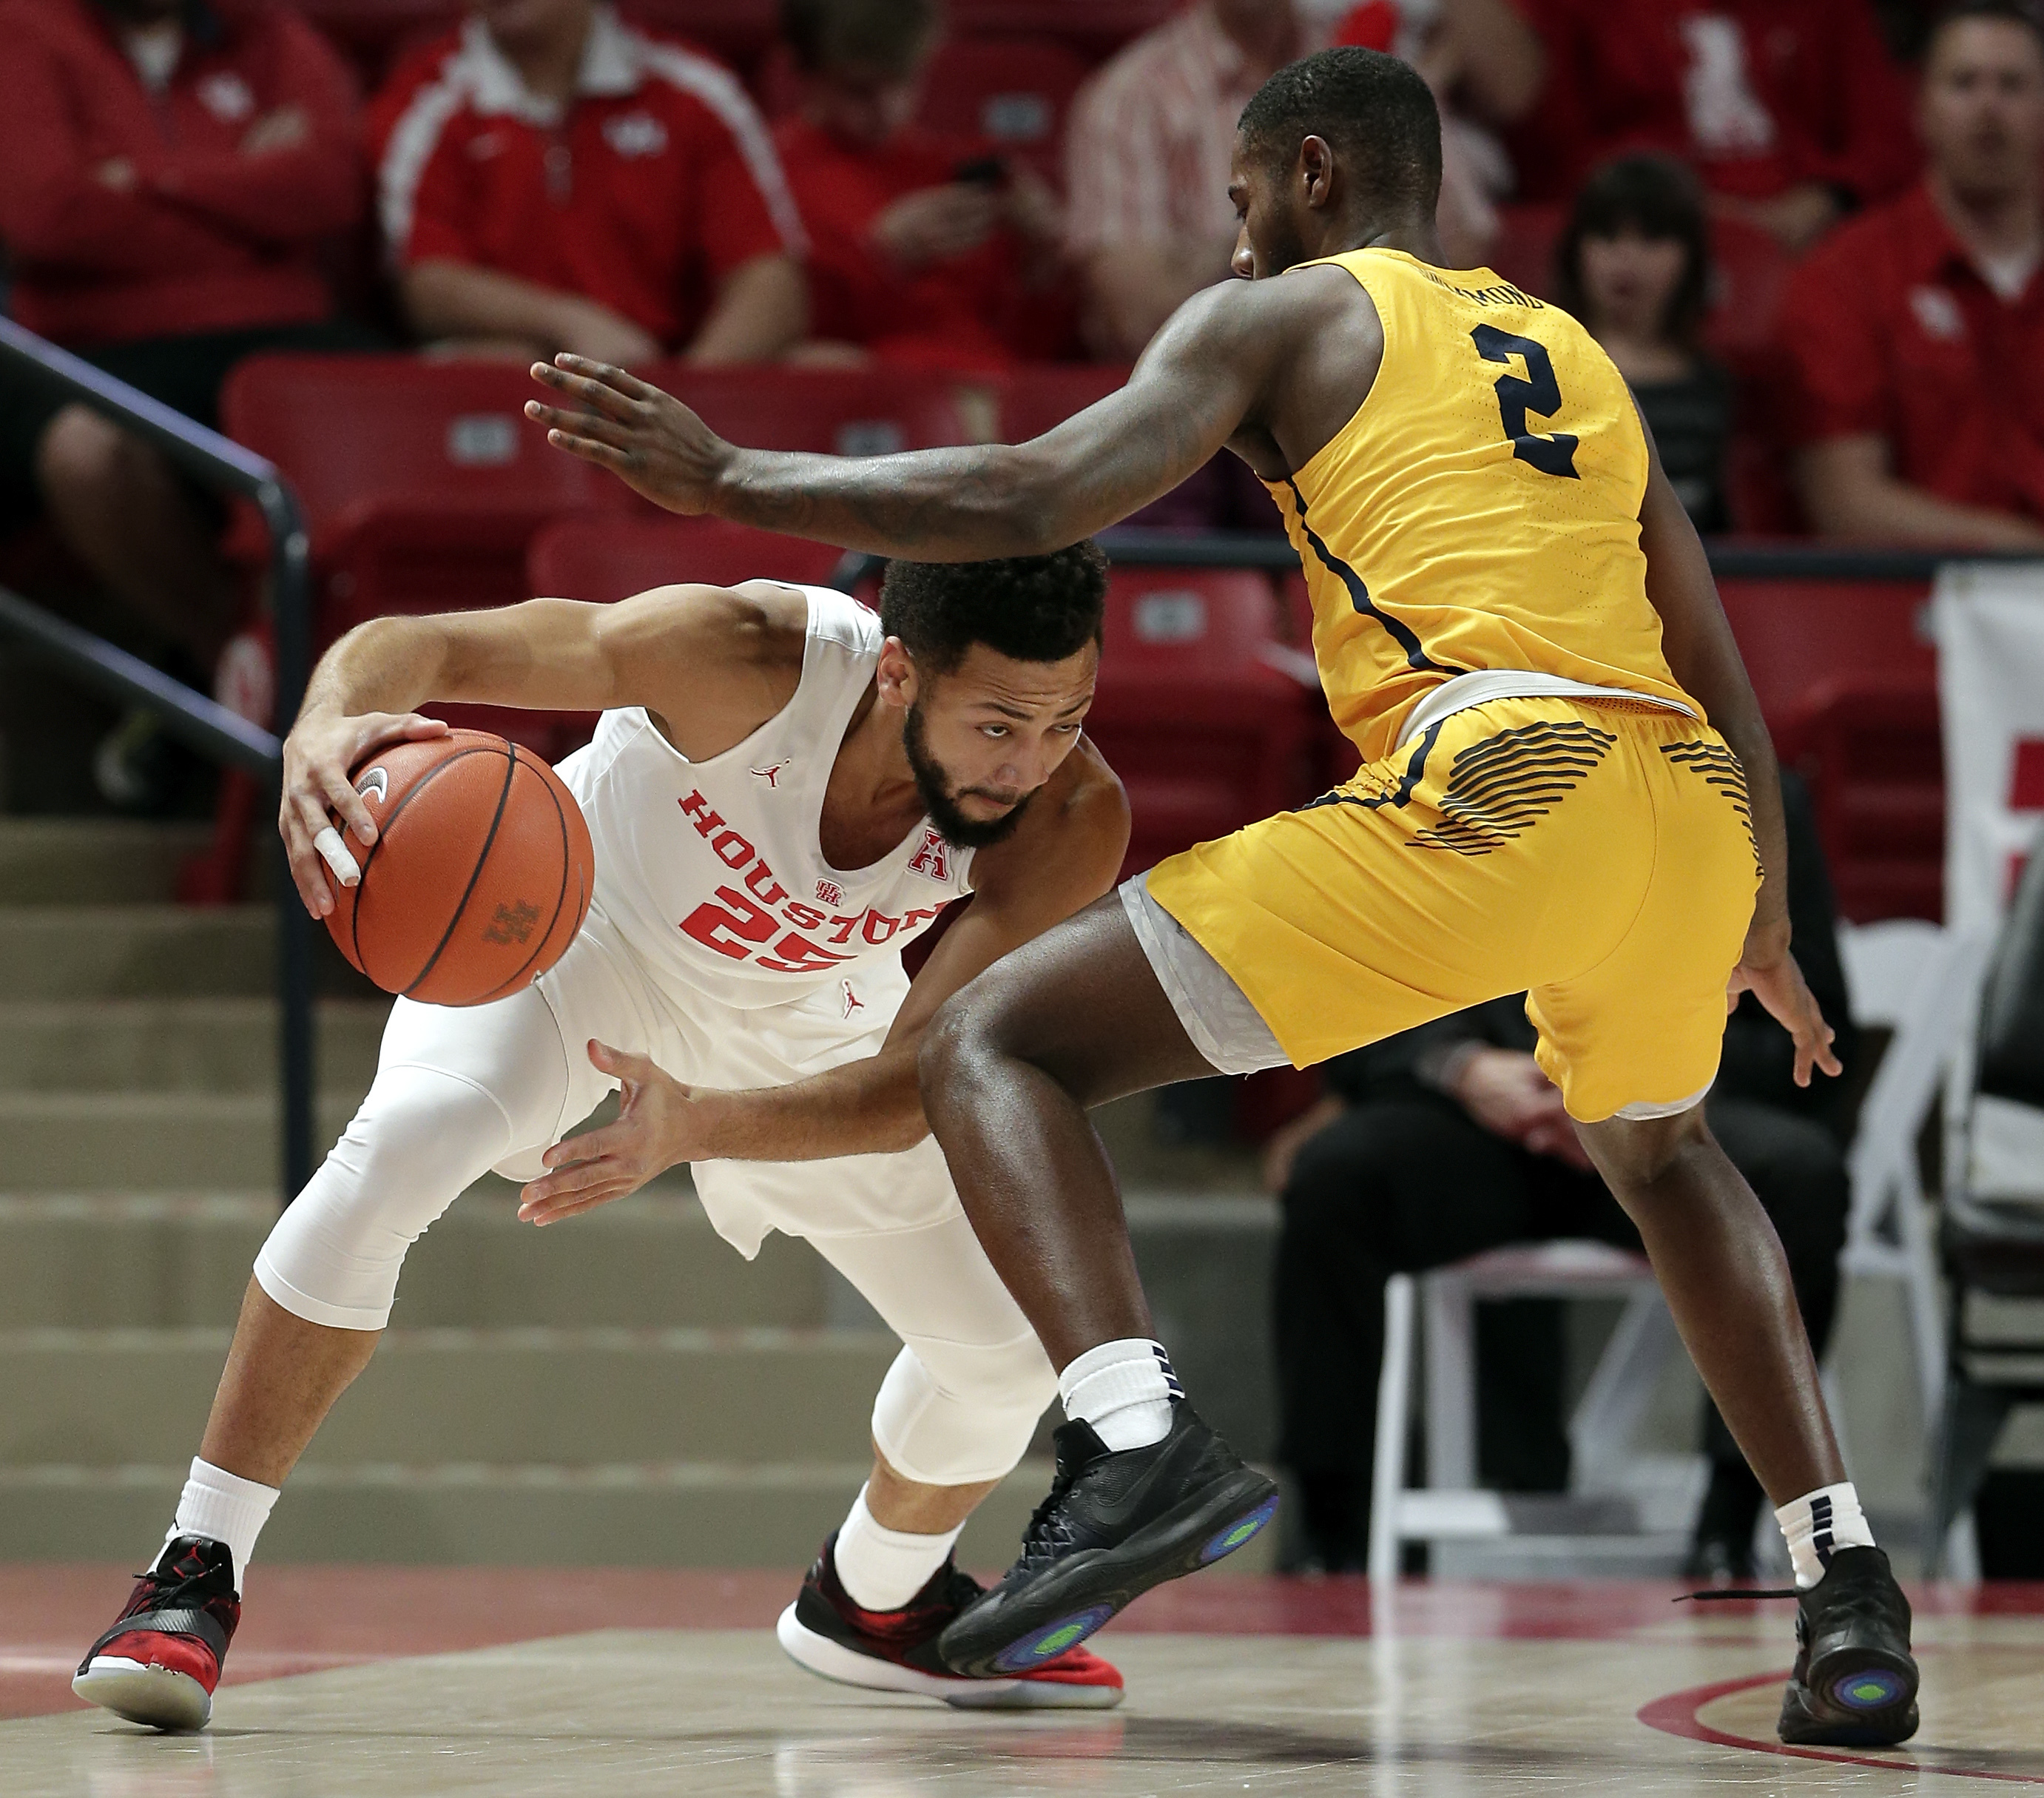 No. 21 Houston improves to 12-0, routing winless Coppin St